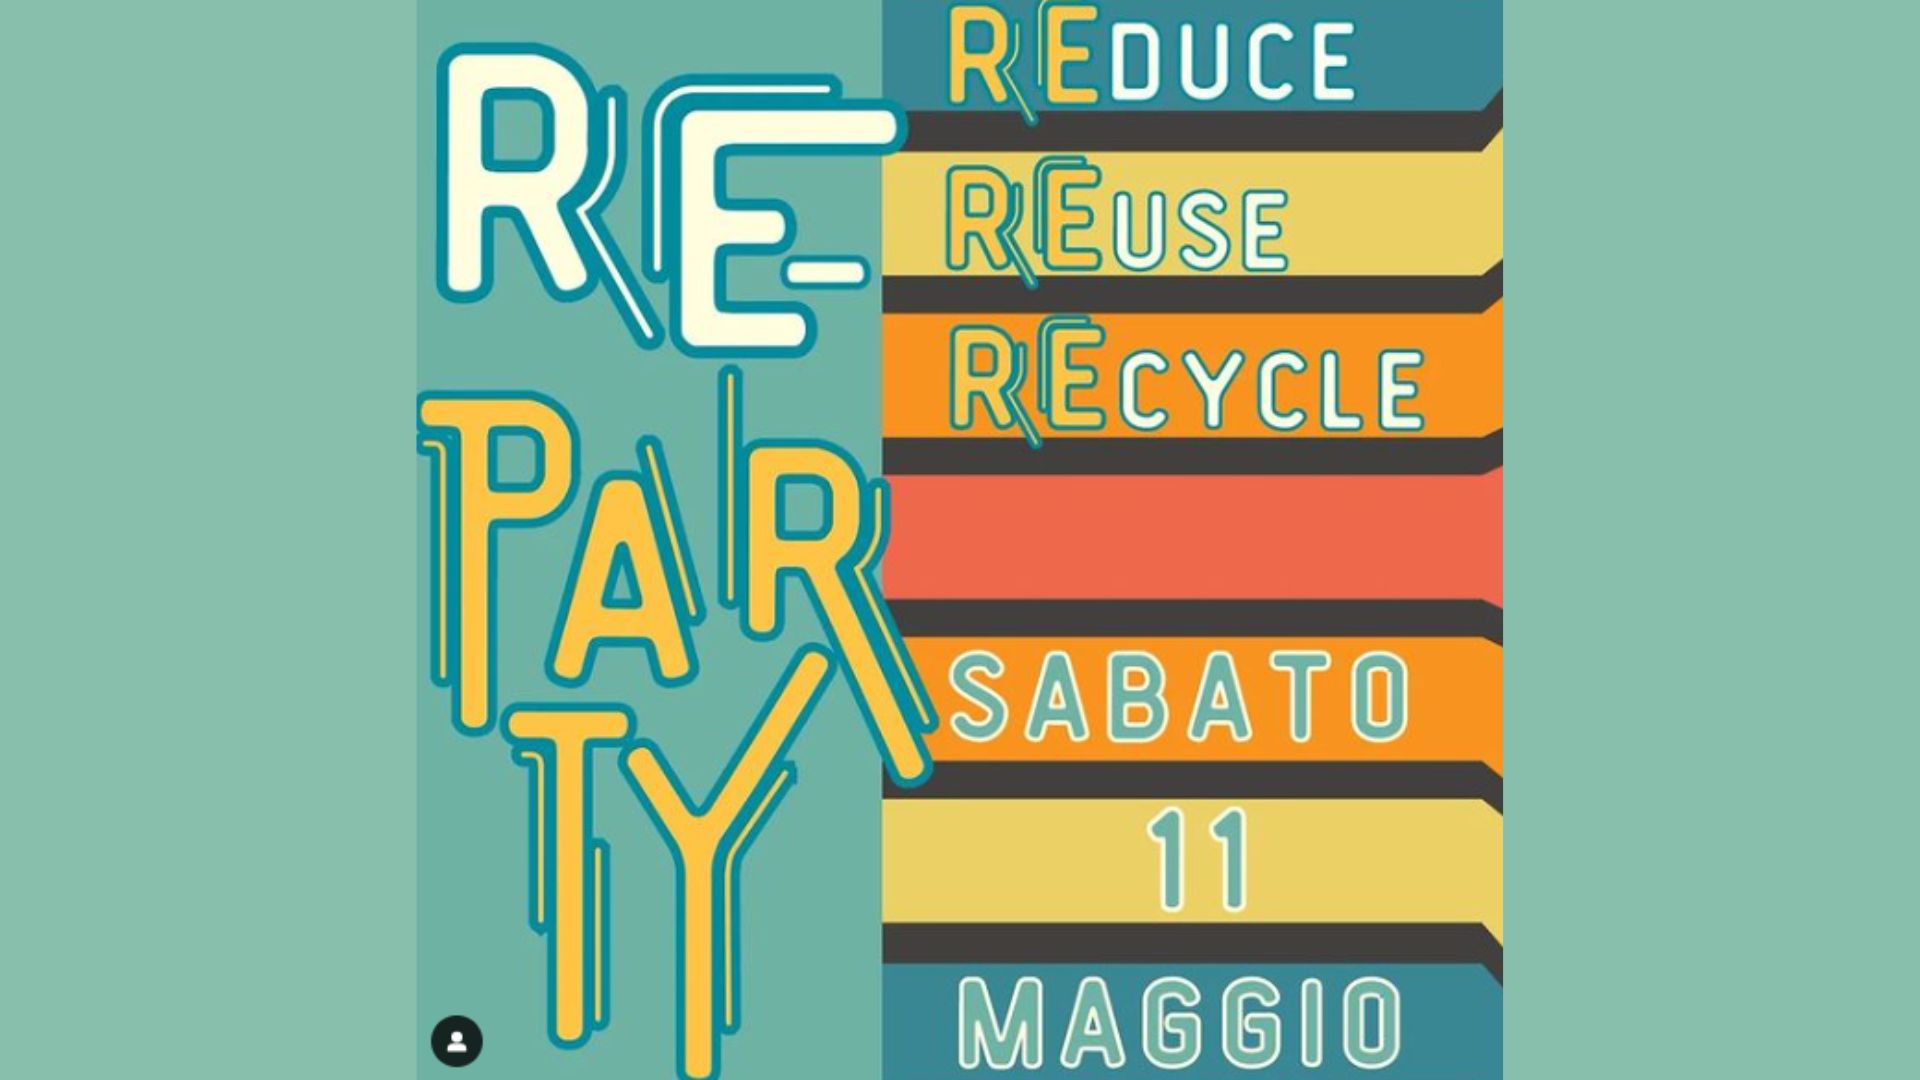 RE-PARTY: REDUCE, REUSE, RECYCLE